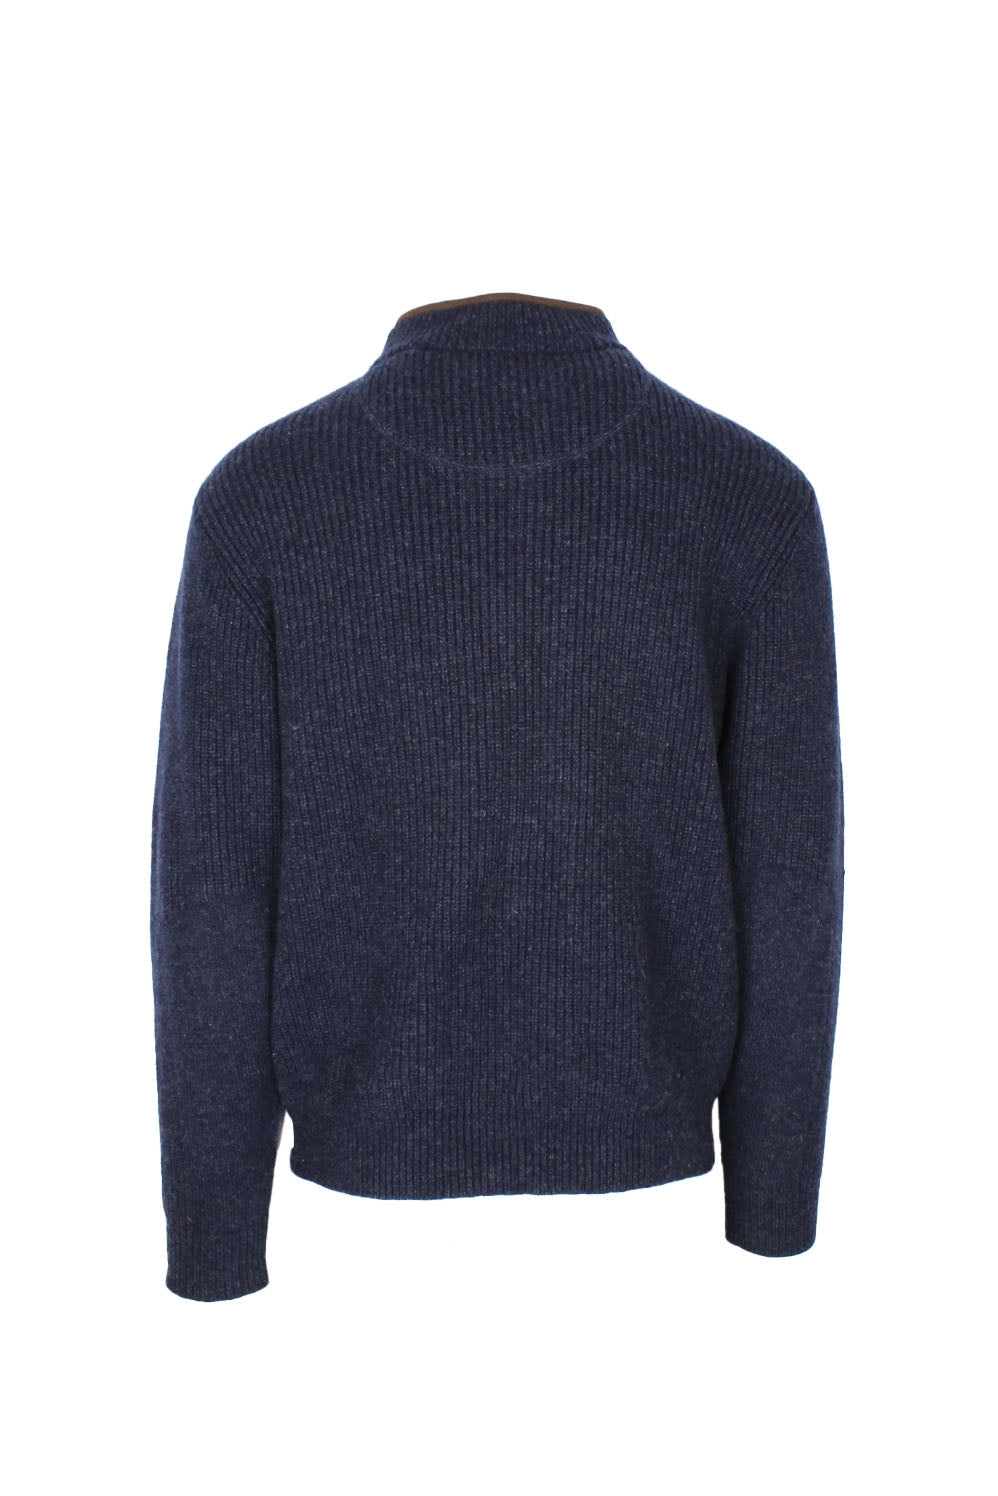 rear view with partially lined collar of sweater.